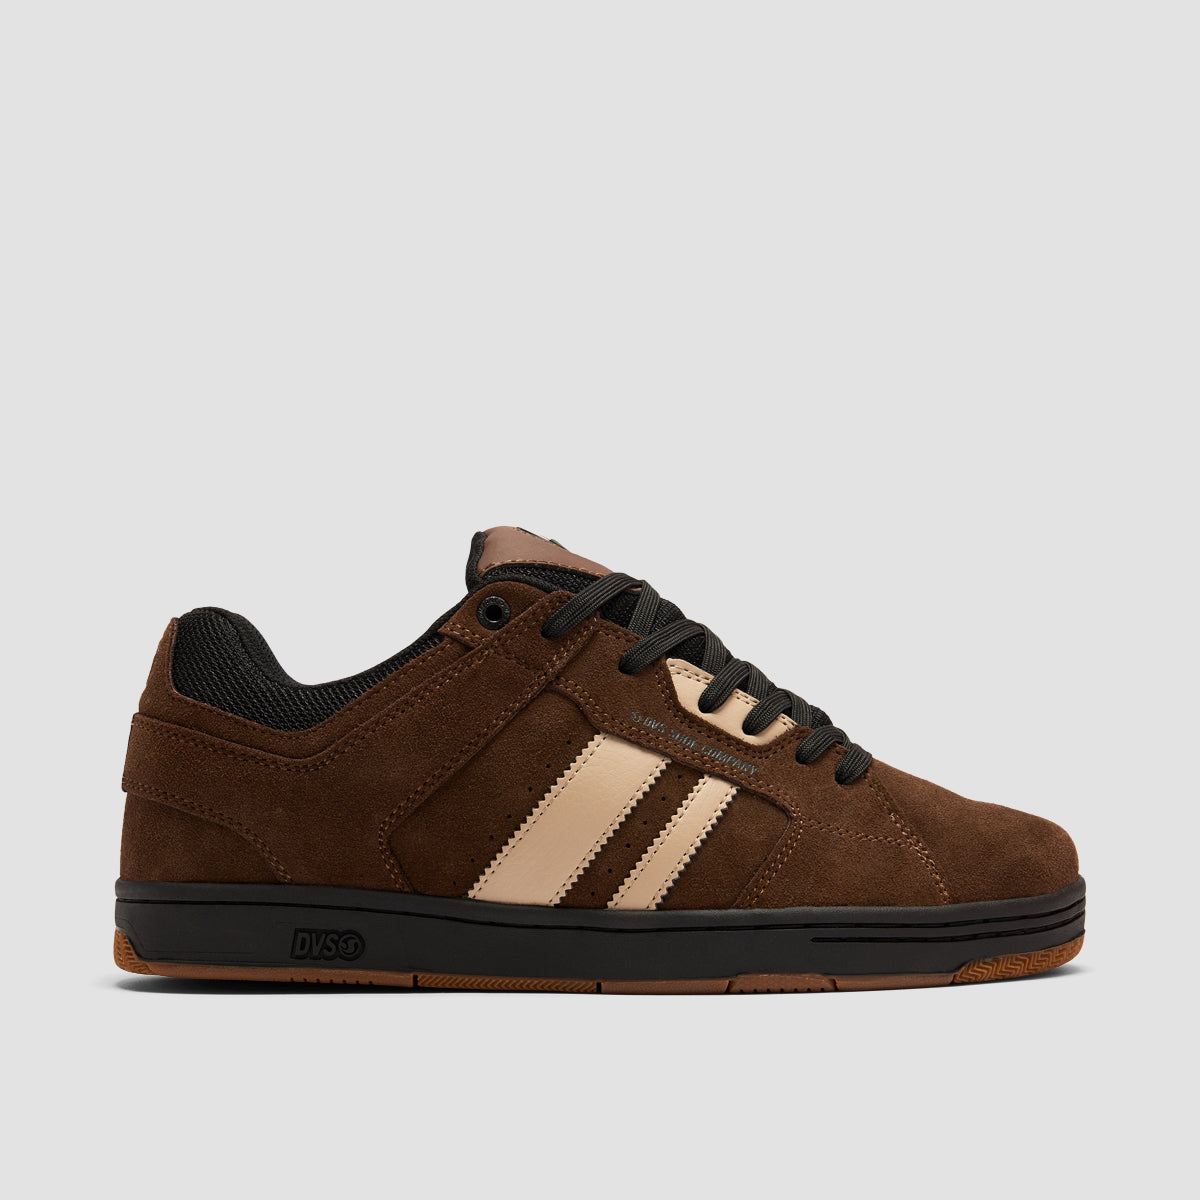 DVS Tactic Shoes - Brown/Taupe/Black Suede